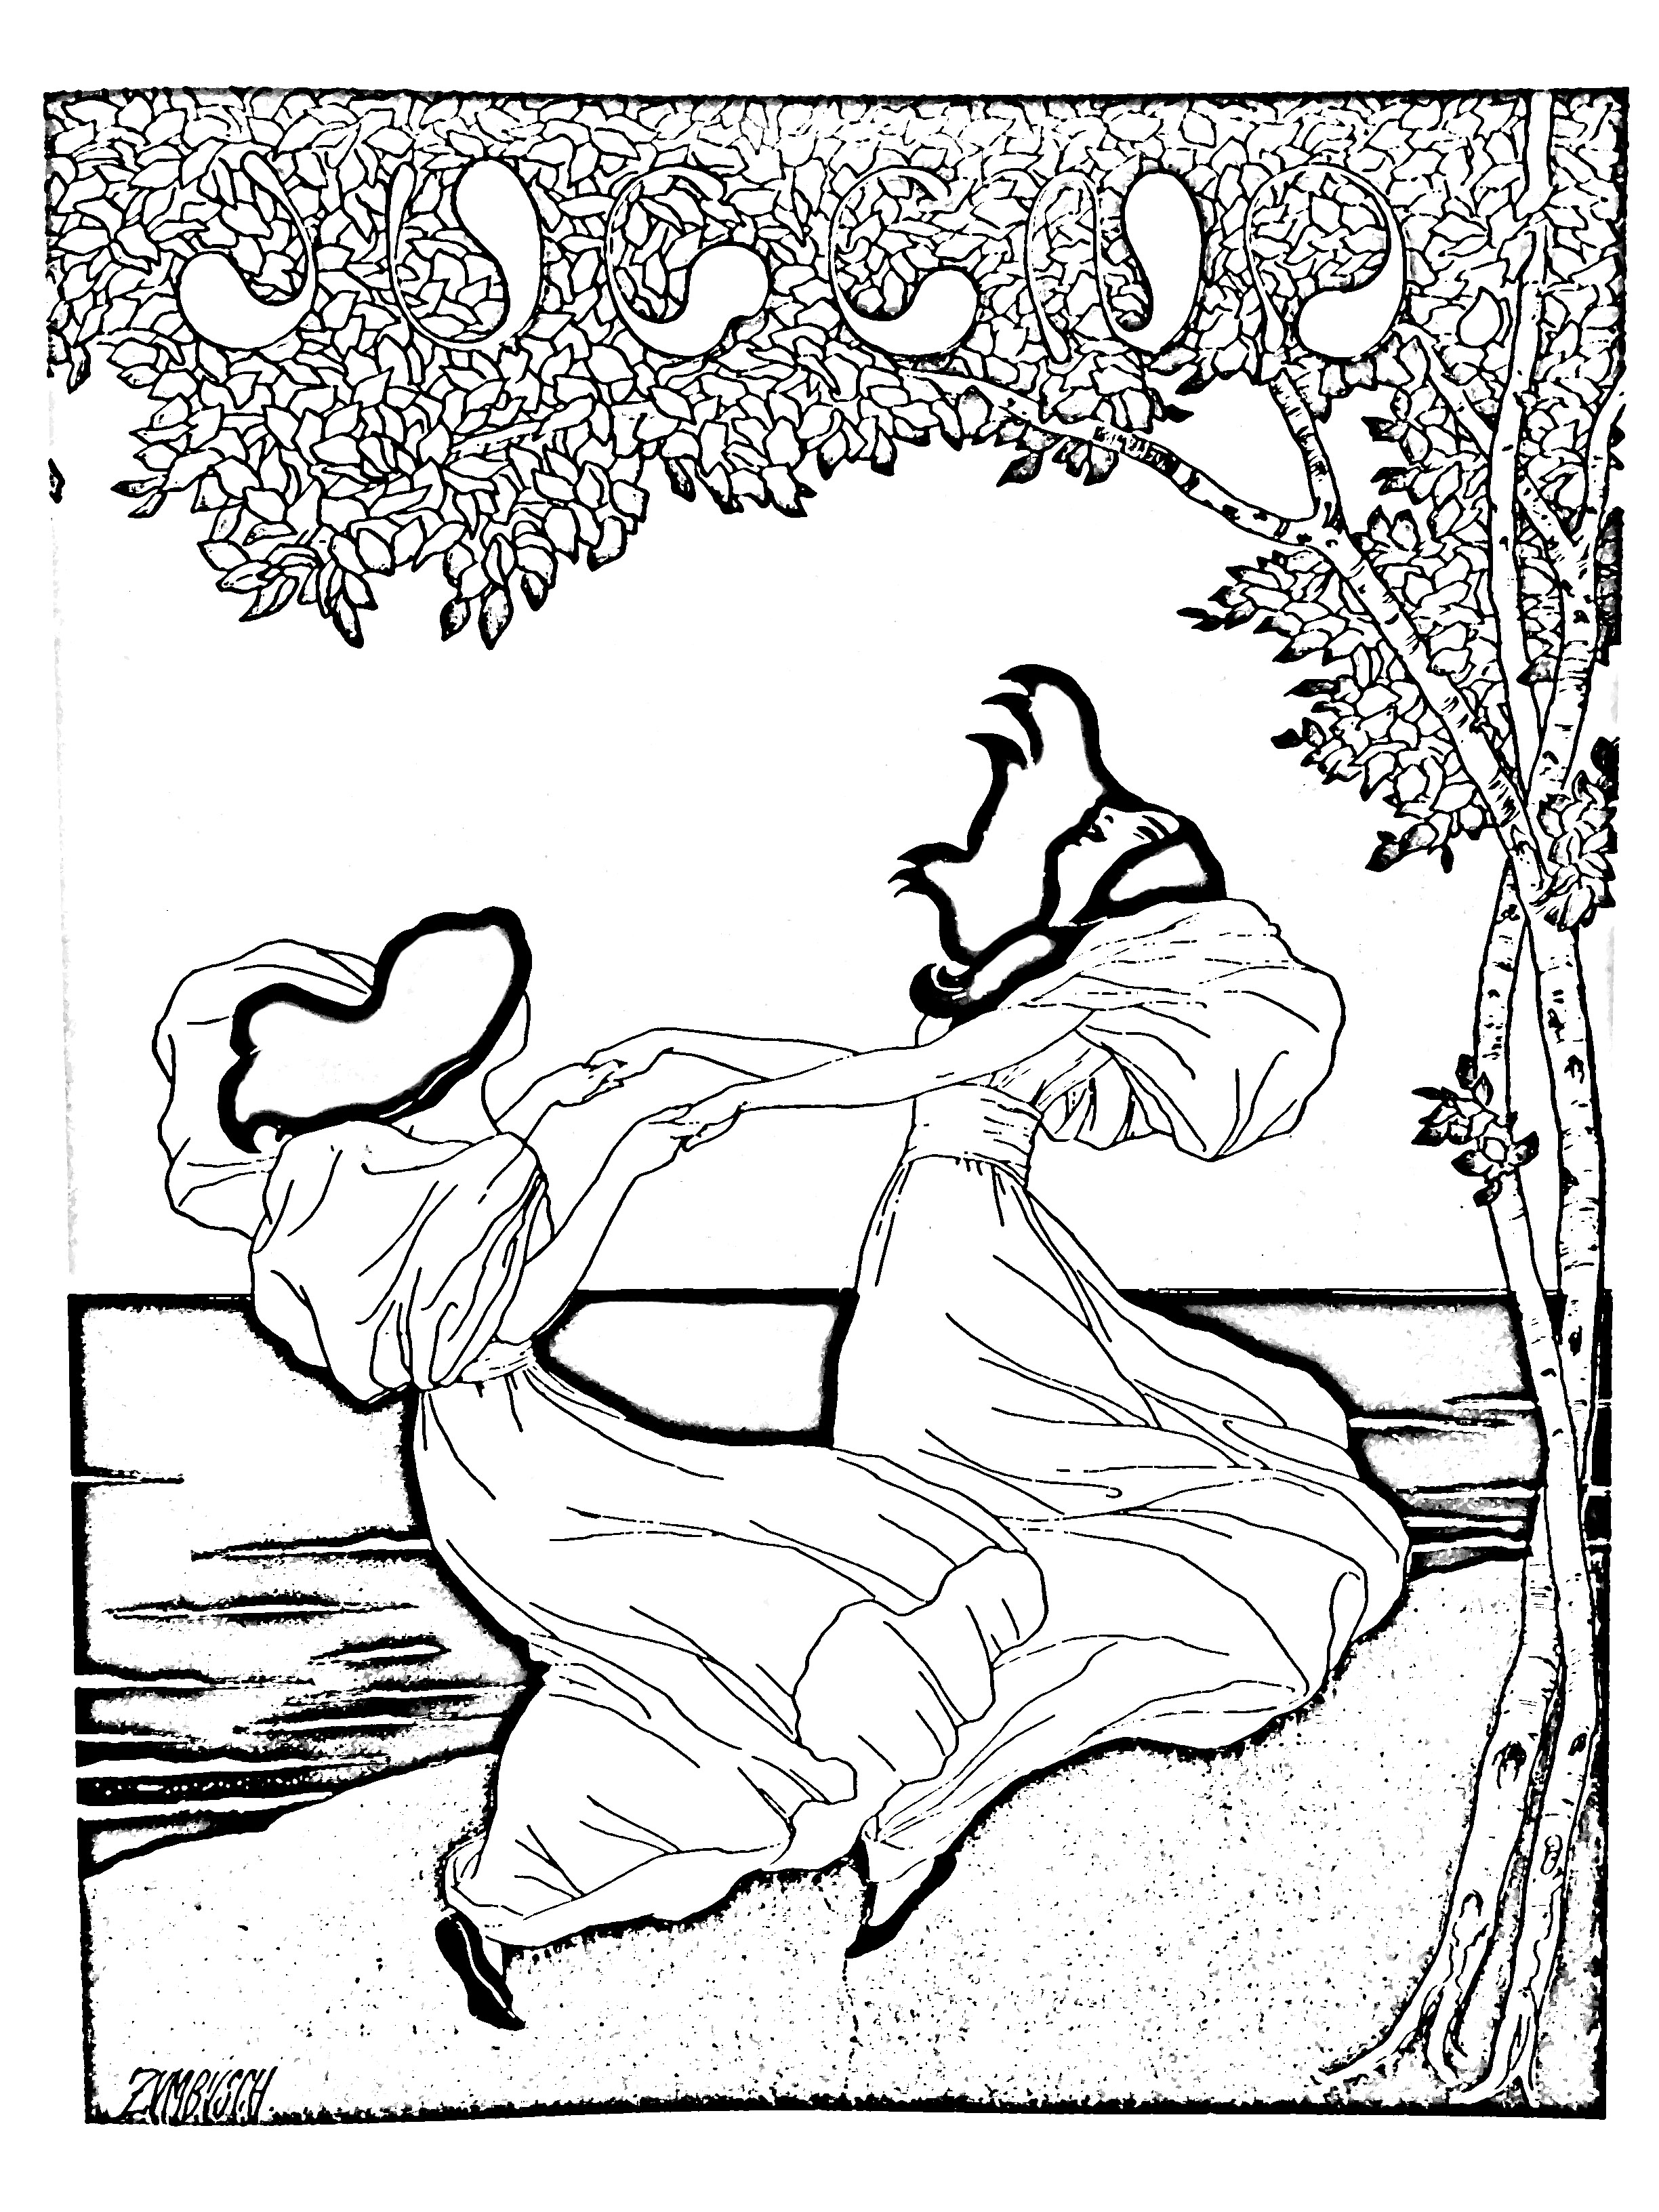 Coloring page from a lithography by Ludwig von Zumbush (1900)